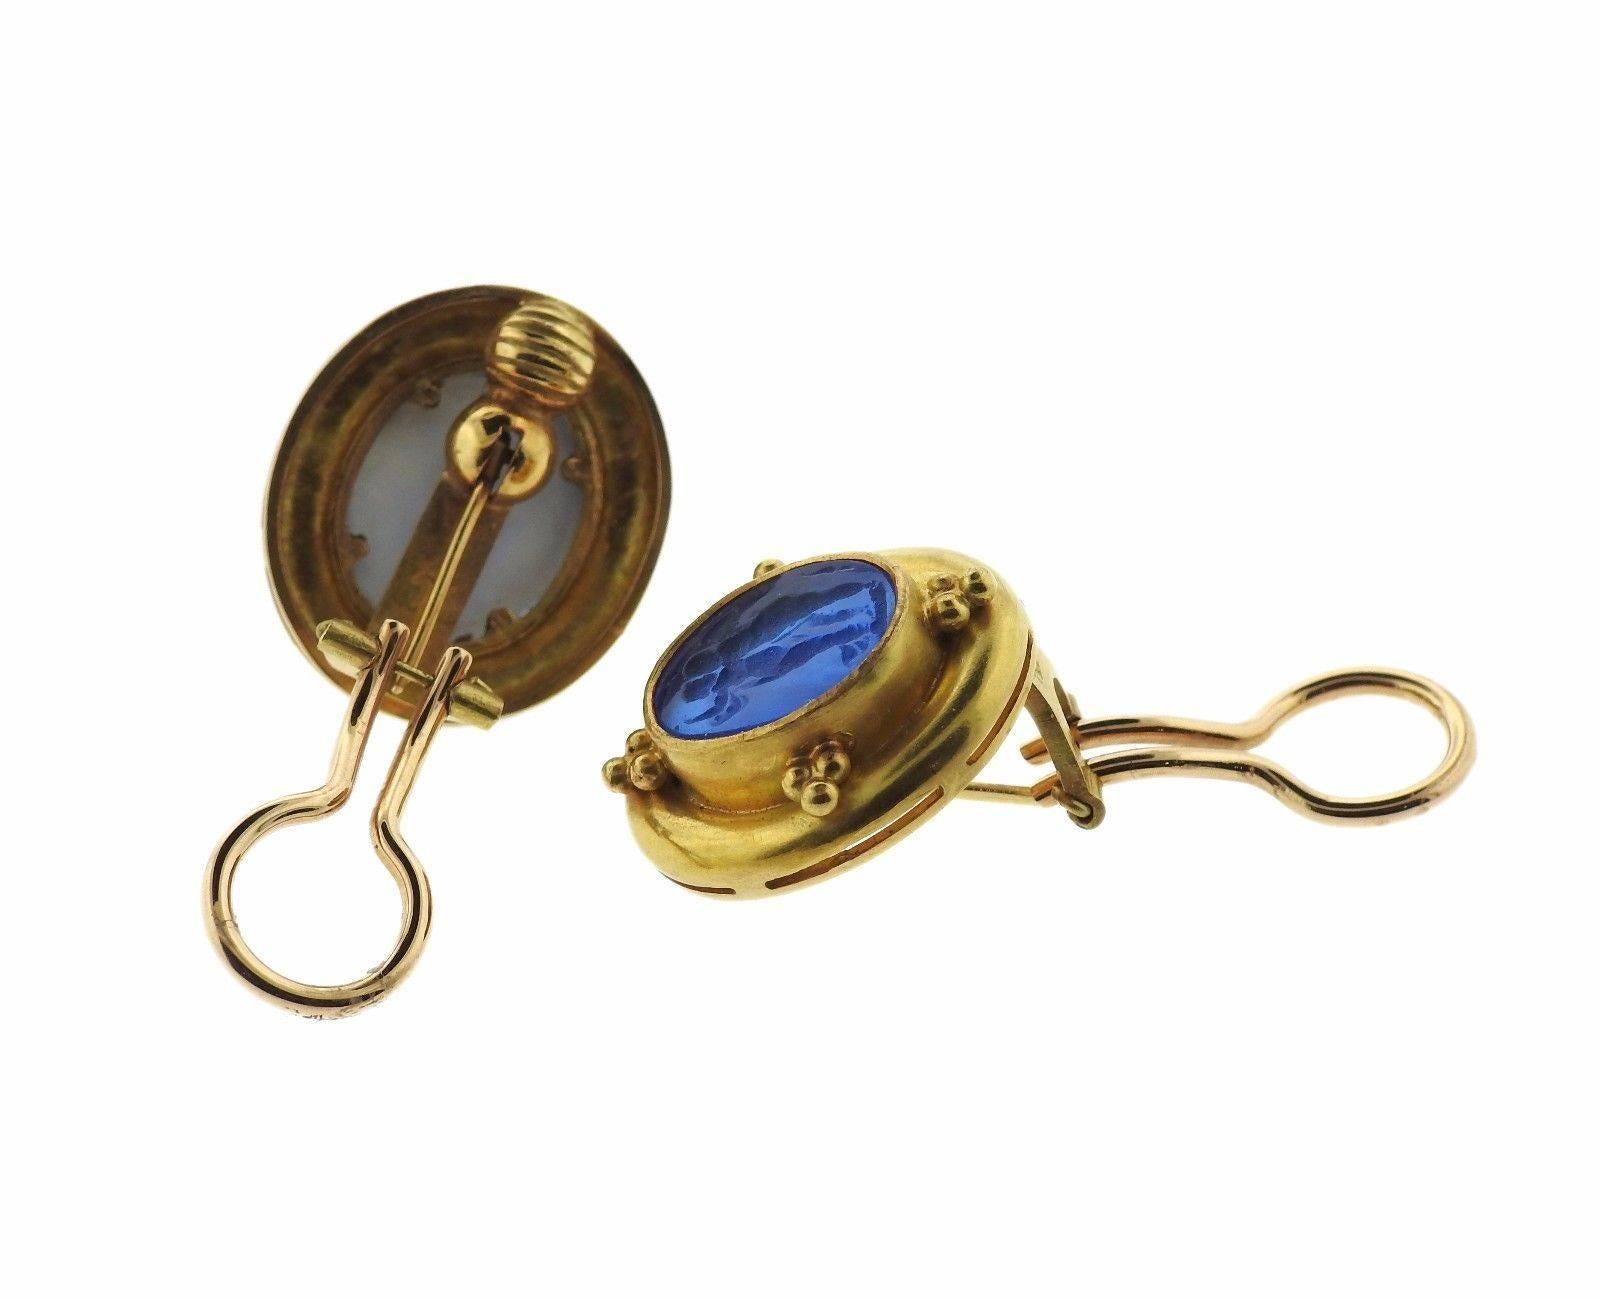 A pair of 18k yellow gold earrings, crafted by Elizabeth Locke, featuring collapsible posts. Earrings are decorated with blue Venetian glass intaglio, backed with mother of pearl. Earrings measure 22mm x 20mm. Marked: 18k , Locke mark. Weight - 16.9